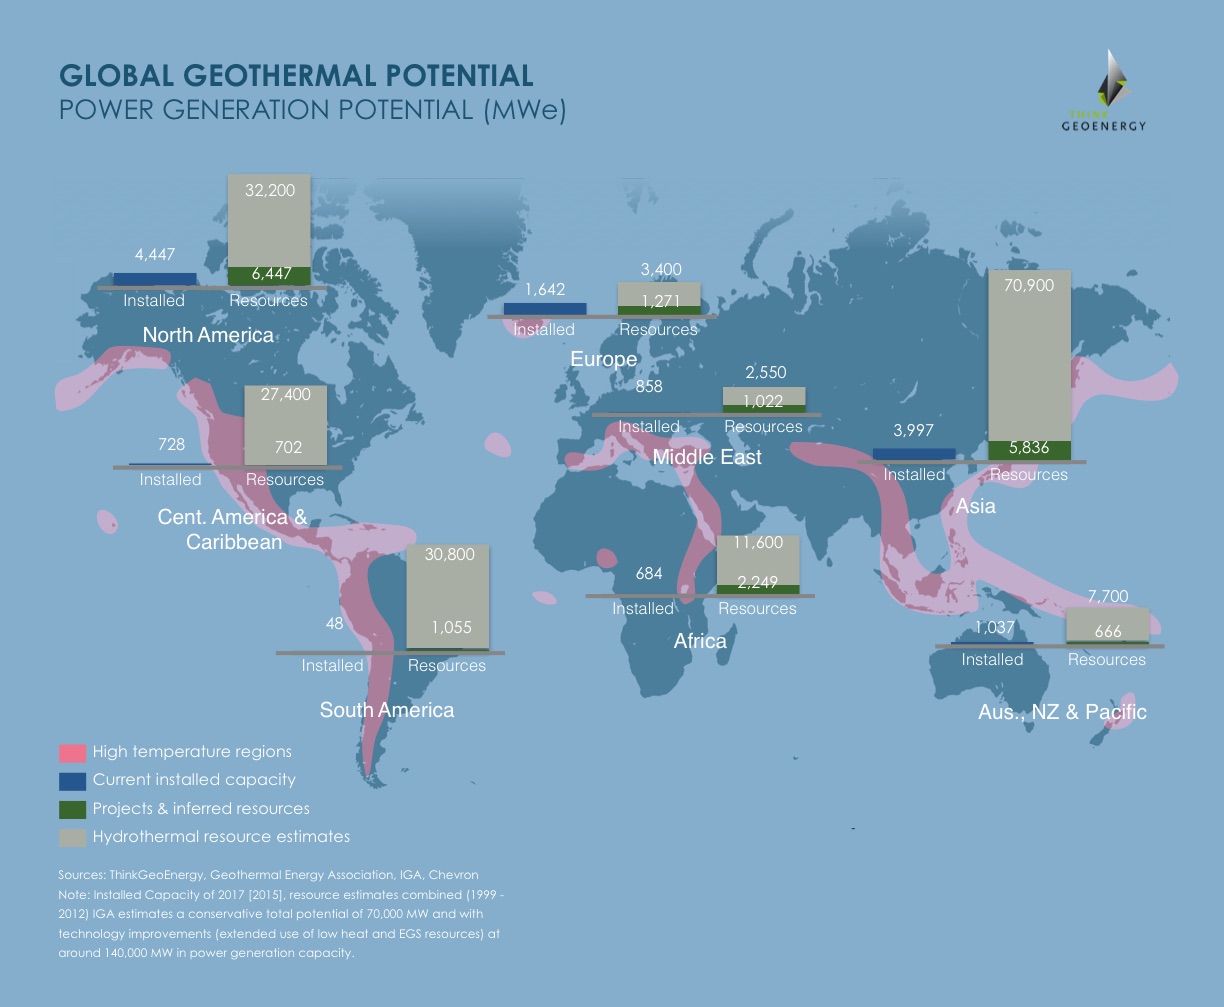 Global geothermal usage (adapted from original)